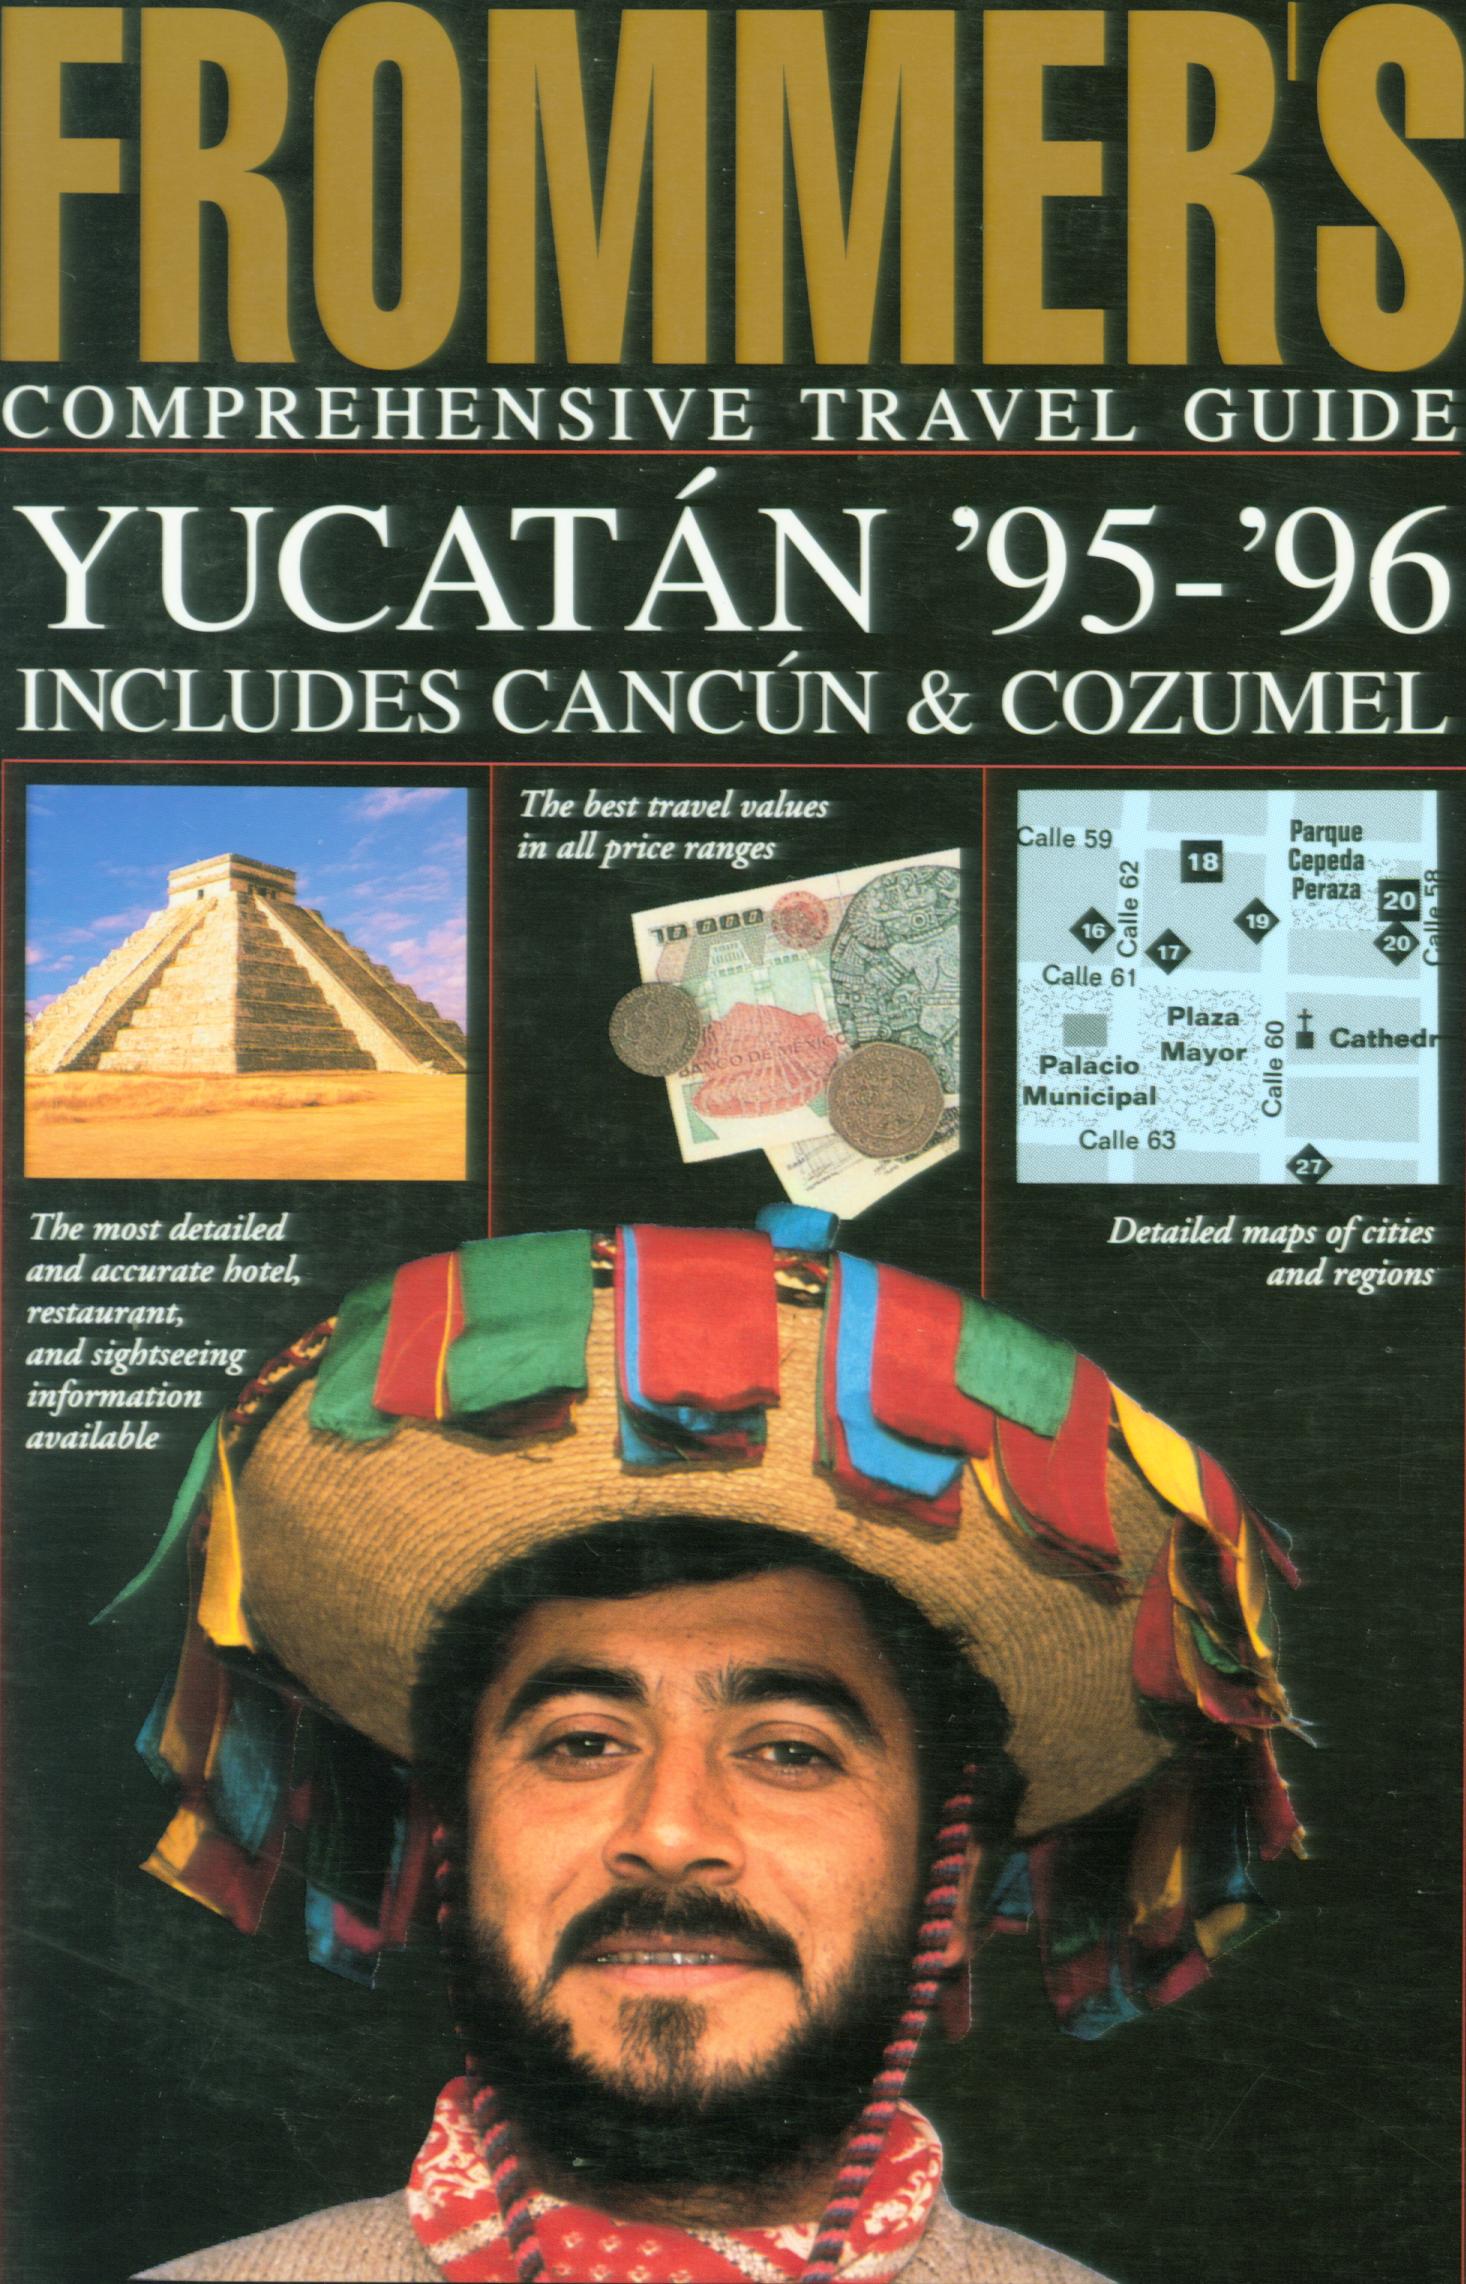 FROMMER'S COMPREHENSIVE TRAVEL GUIIDE: Yucatan '95-'96--includes Cancun & Cozumel. 